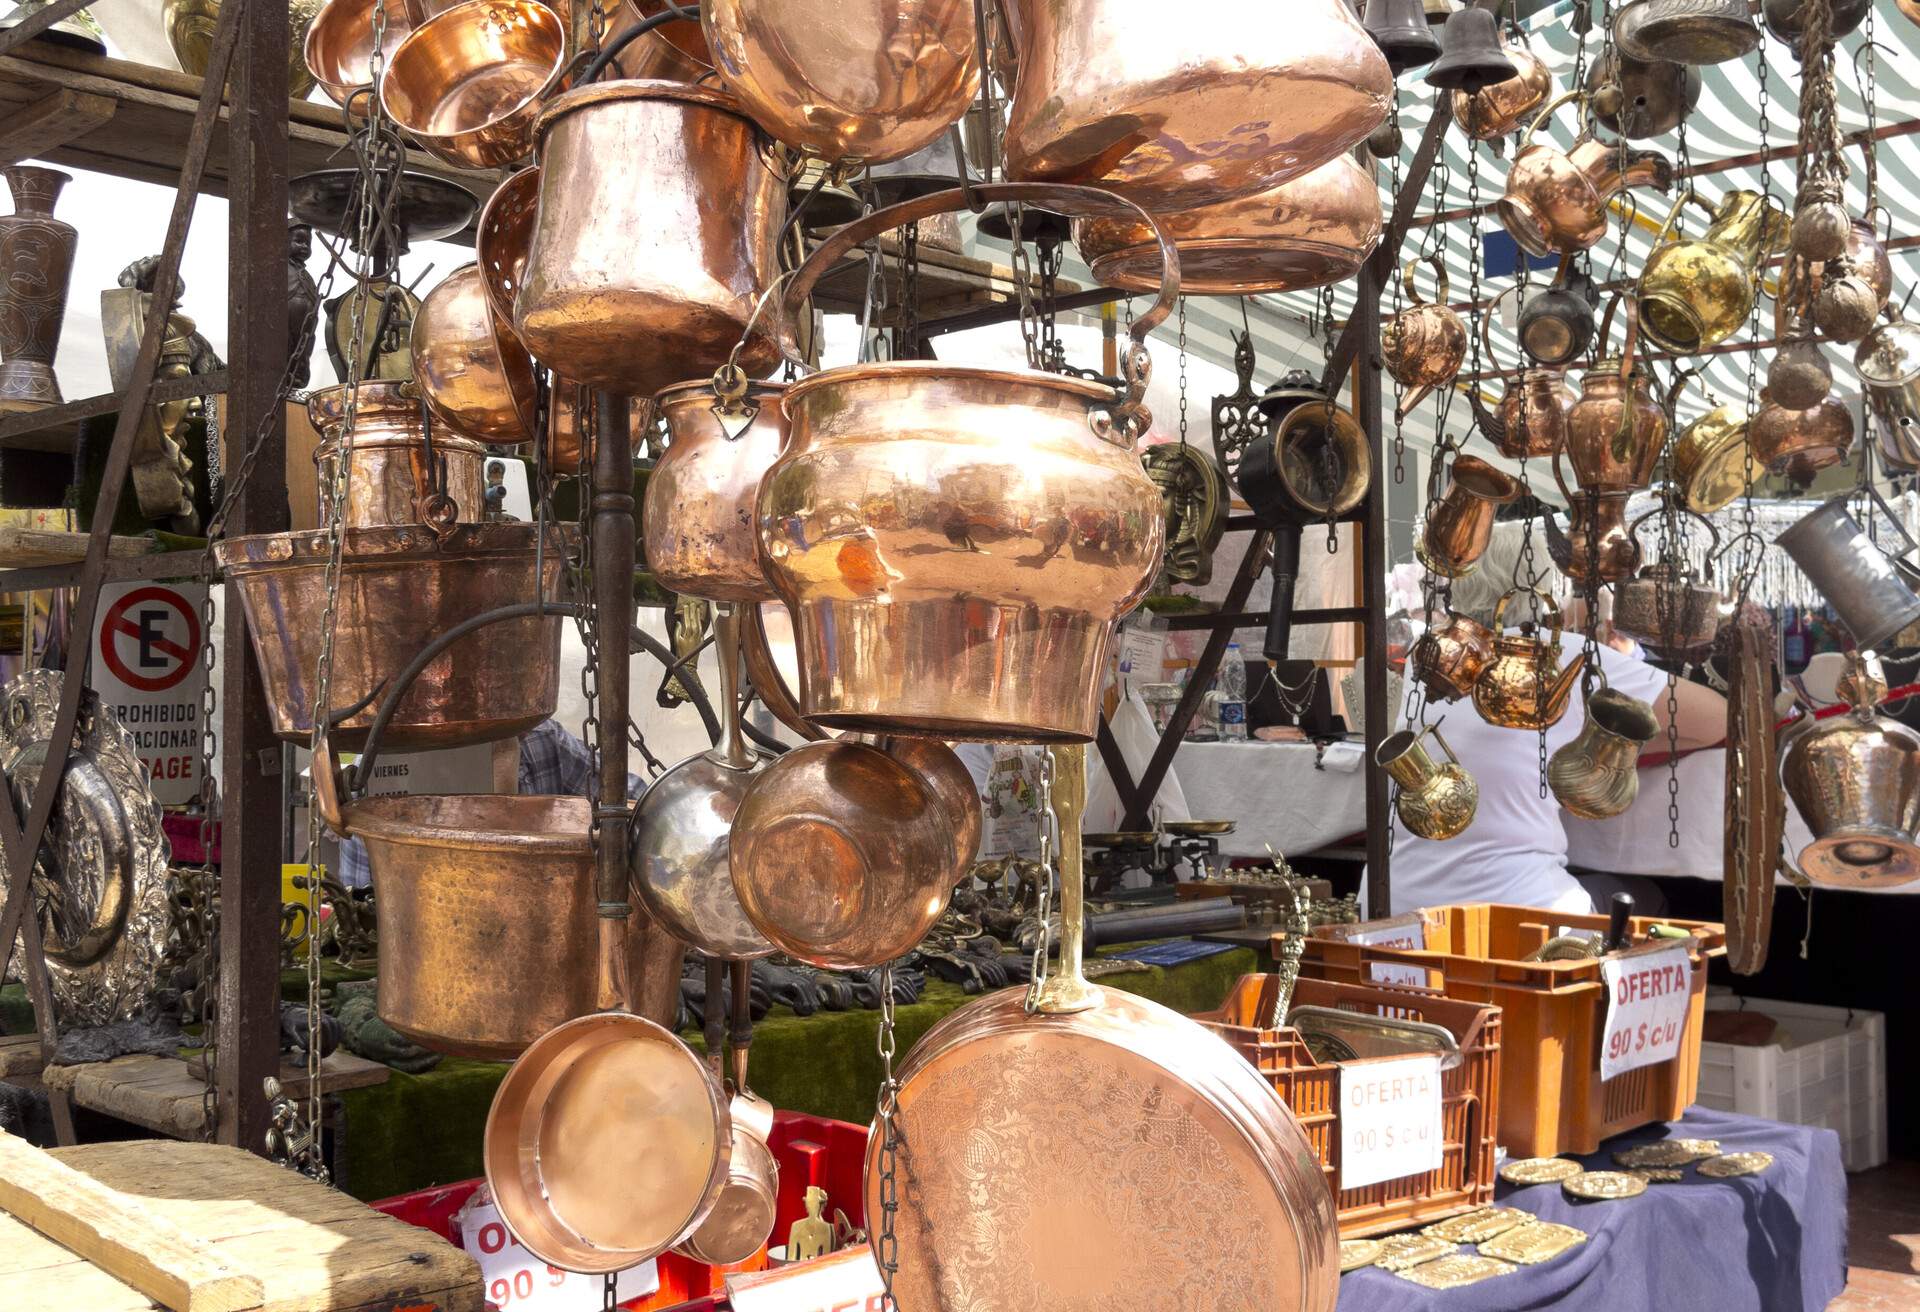 Selling old copper cookware. San Telmo market in Buenos Aires, Argentina.; Shutterstock ID 135760406